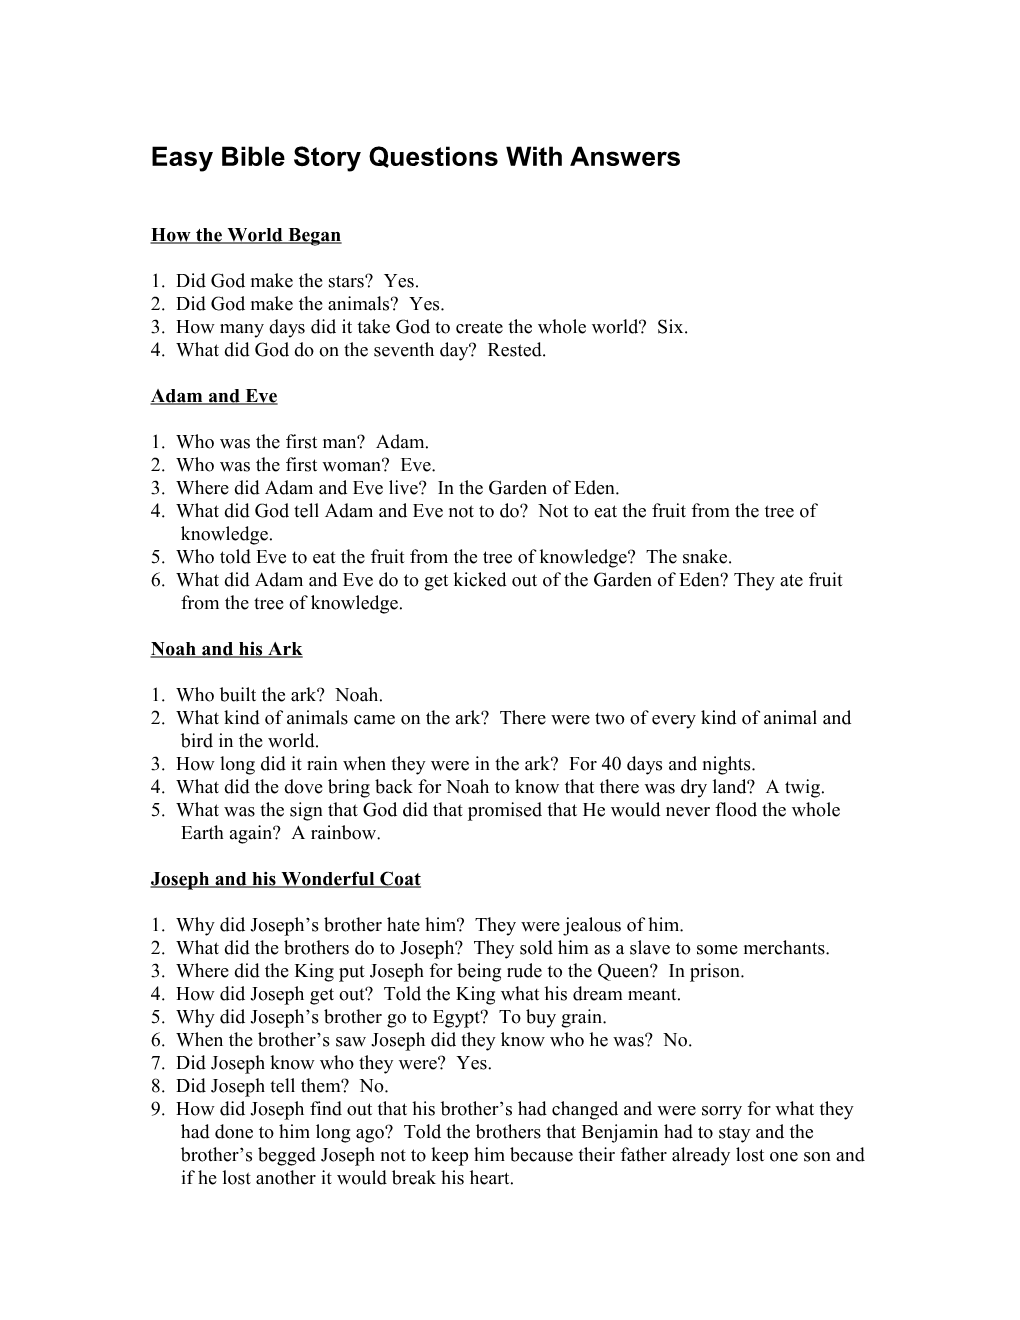 Easy Bible Story Questions with Answers